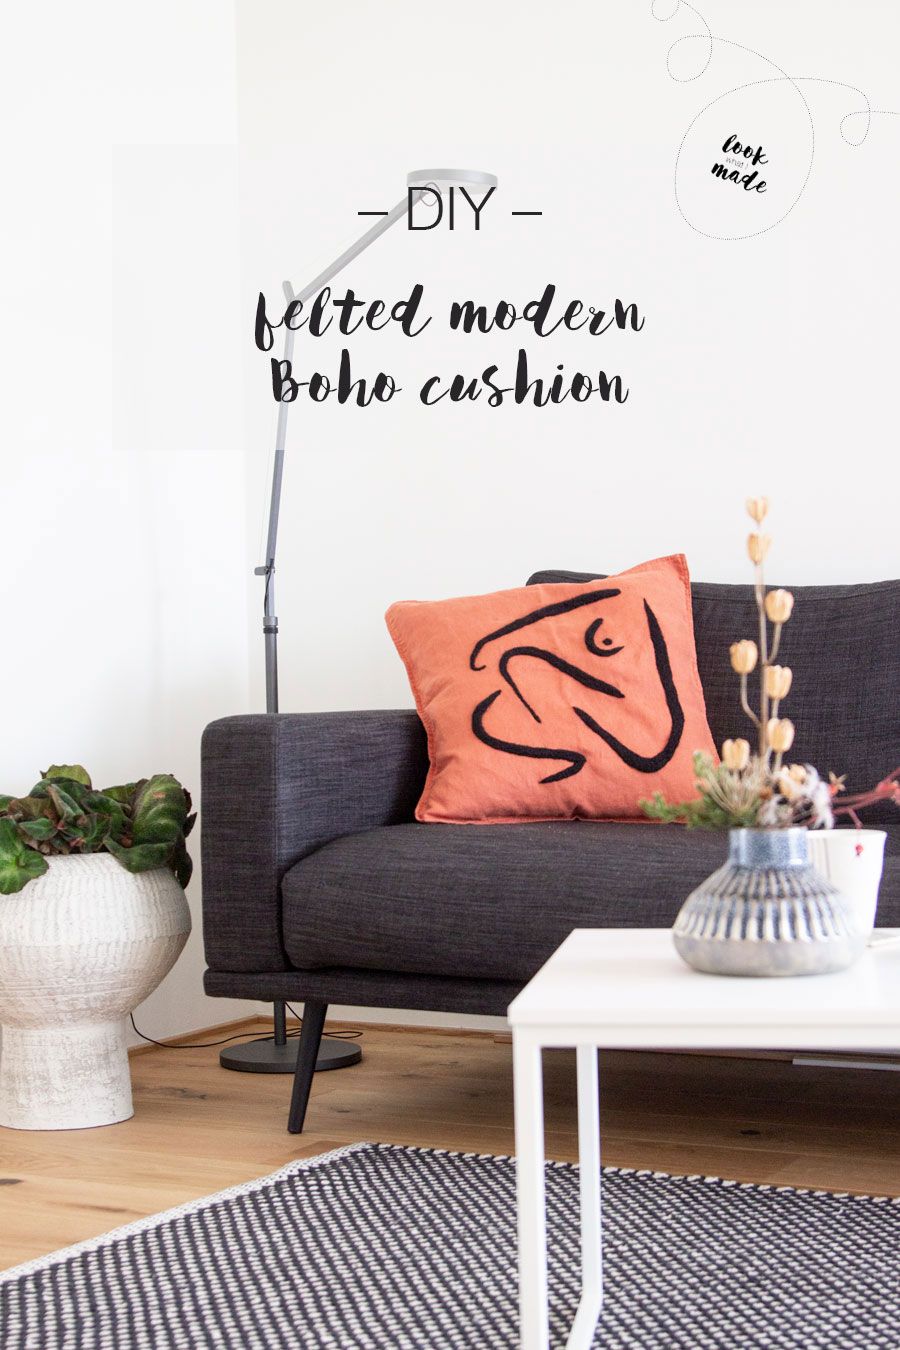 DIY modern felted cushion | LOOK WHAT I MADE ...